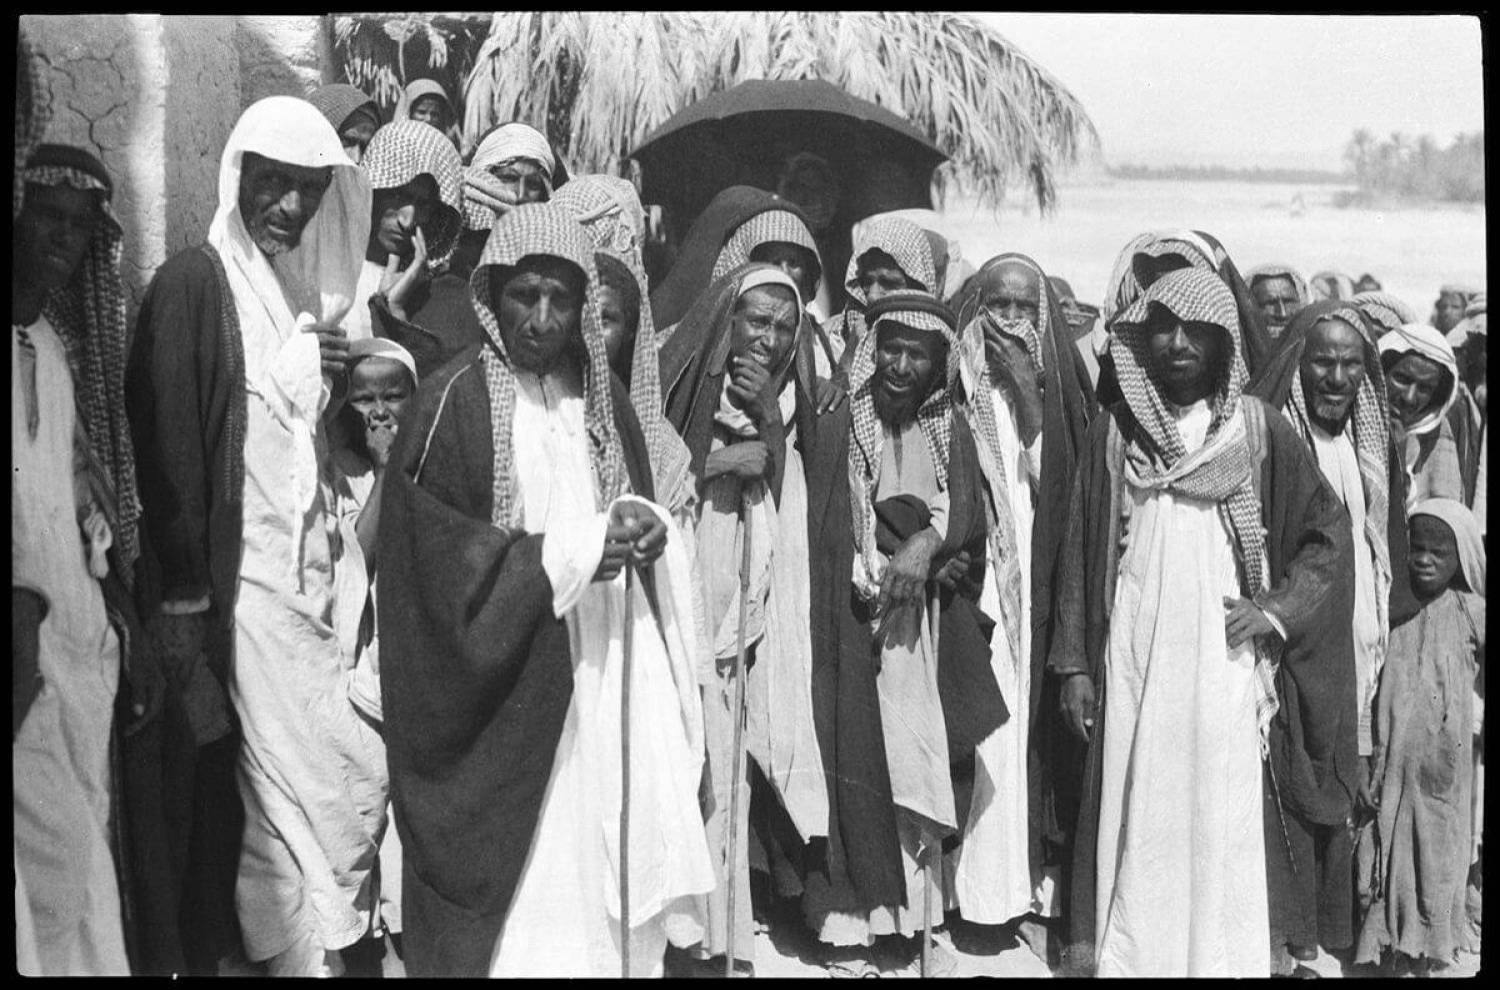 A group of people in an old Saudi market (Asharq Al-Awsat)